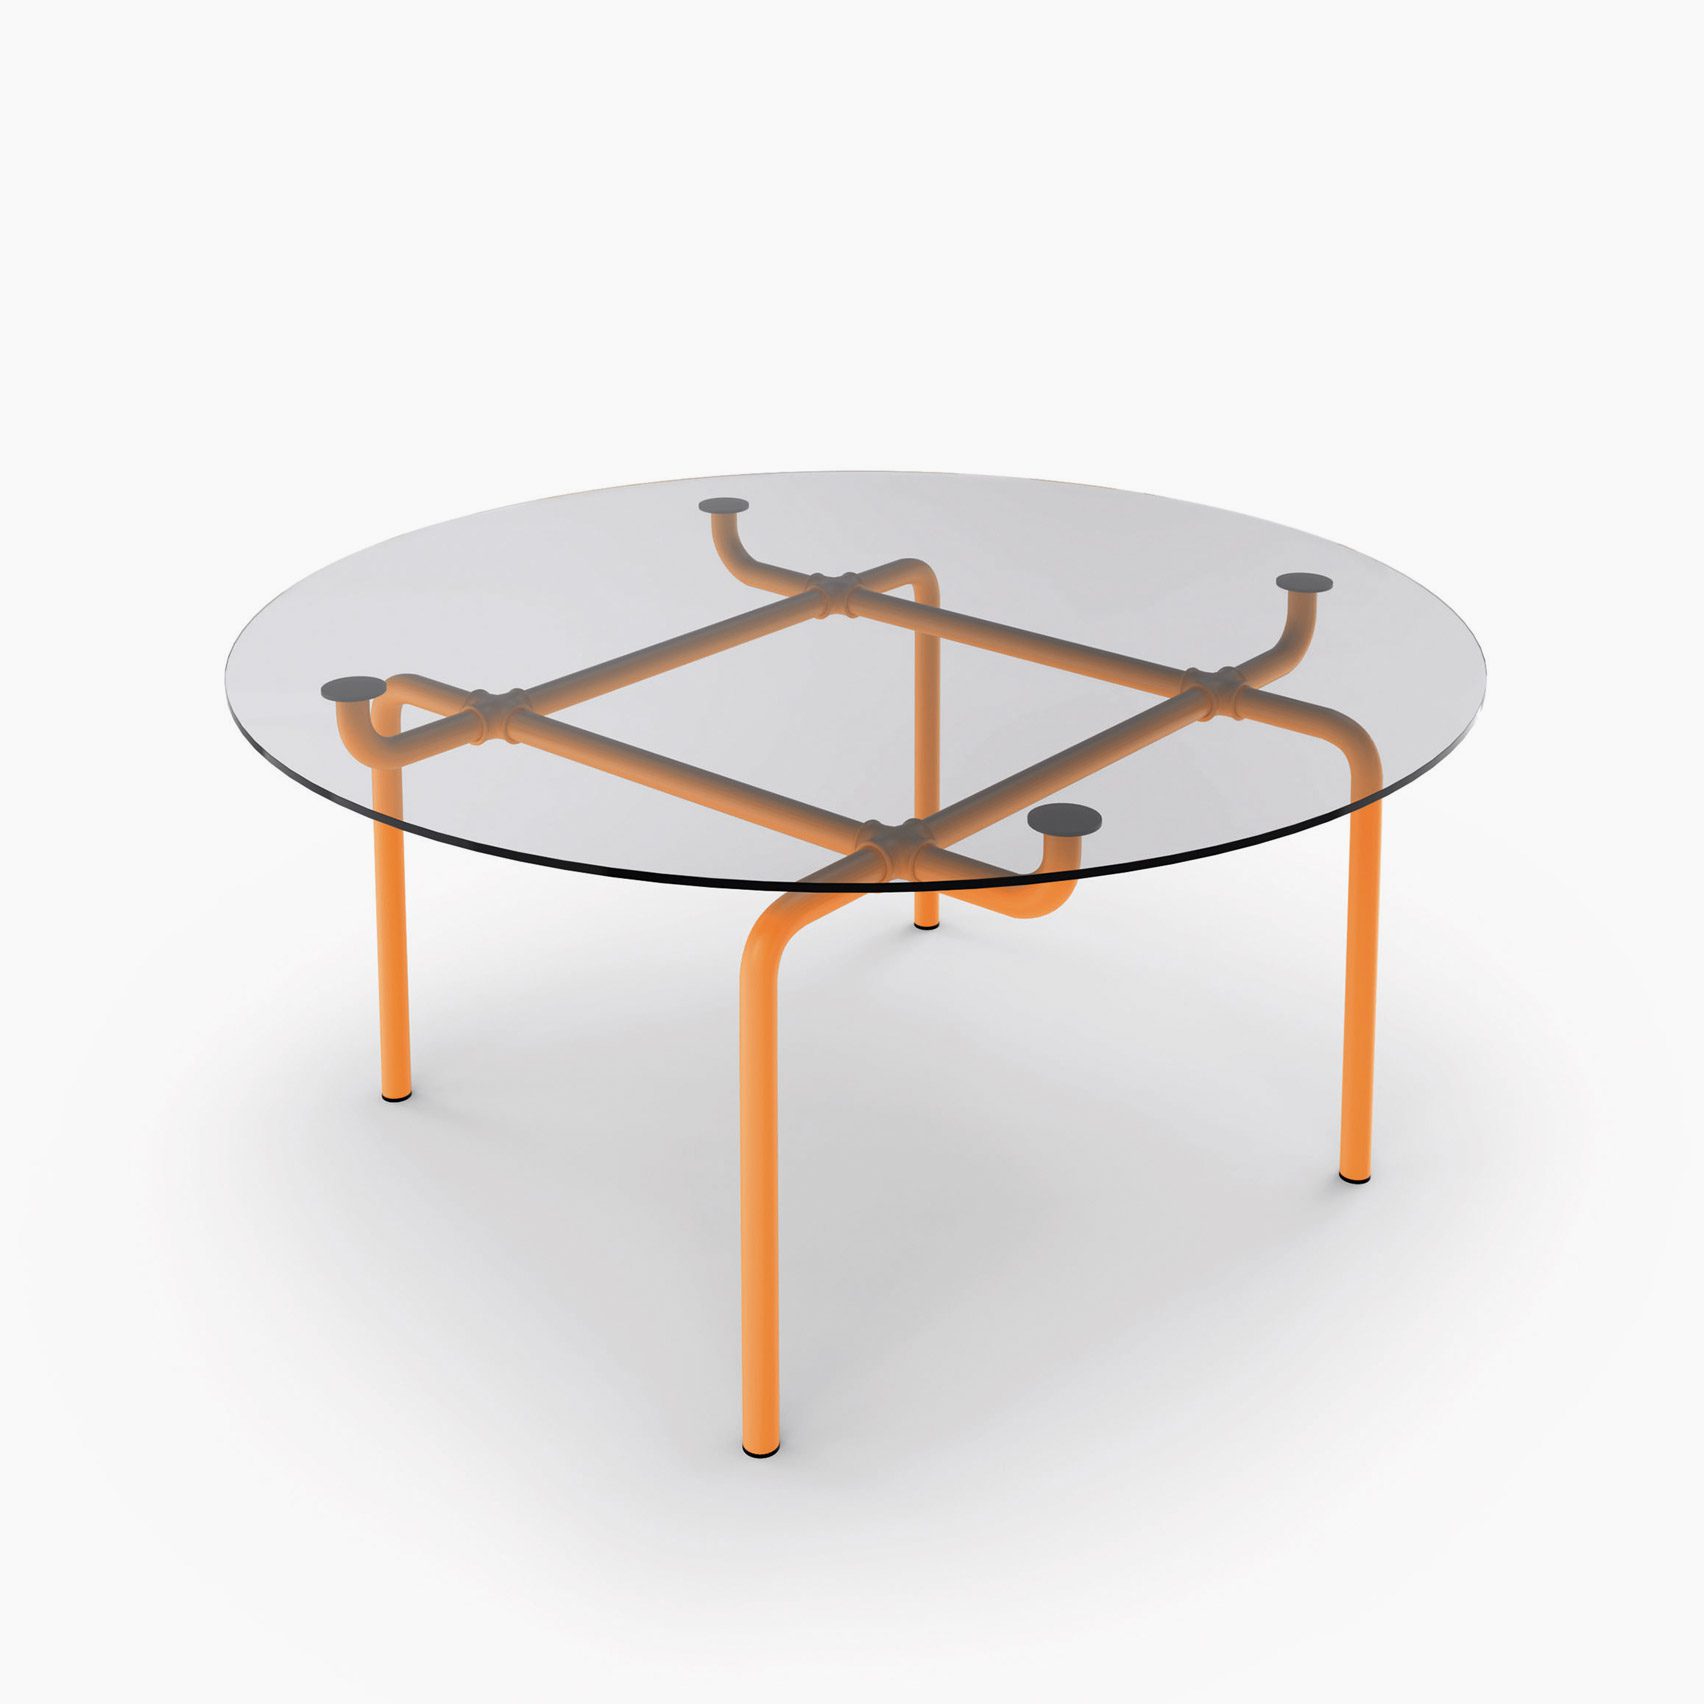 The Edison table with orange-painted steel legs